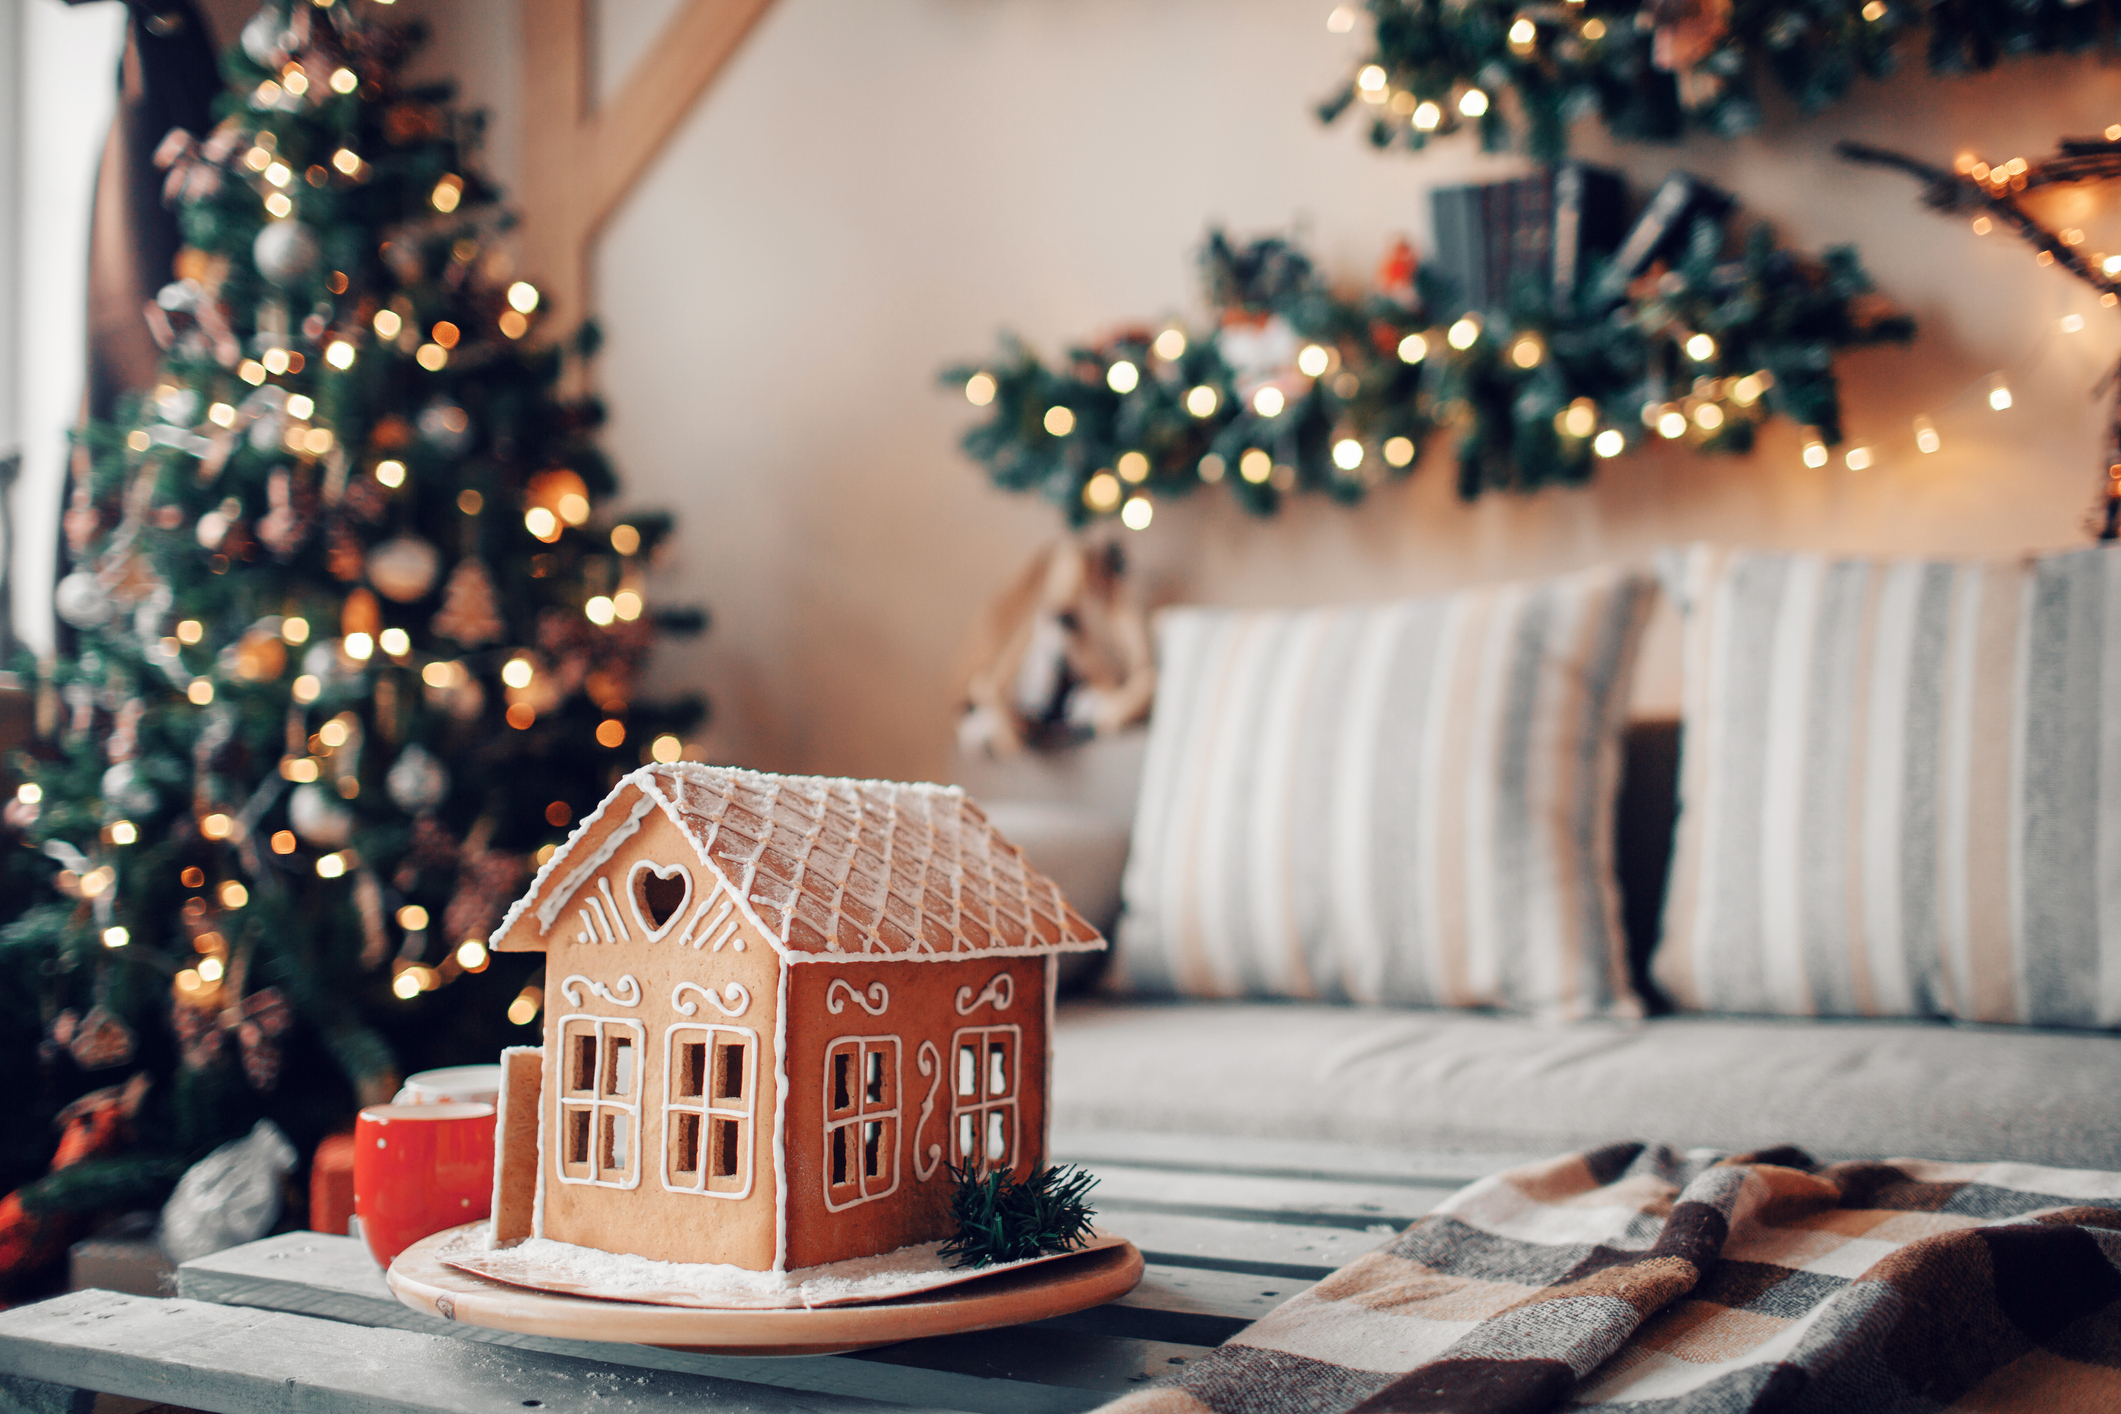 Home for the Holidays: 10 Tips to Save Money and Reach Your Home Ownership Goals